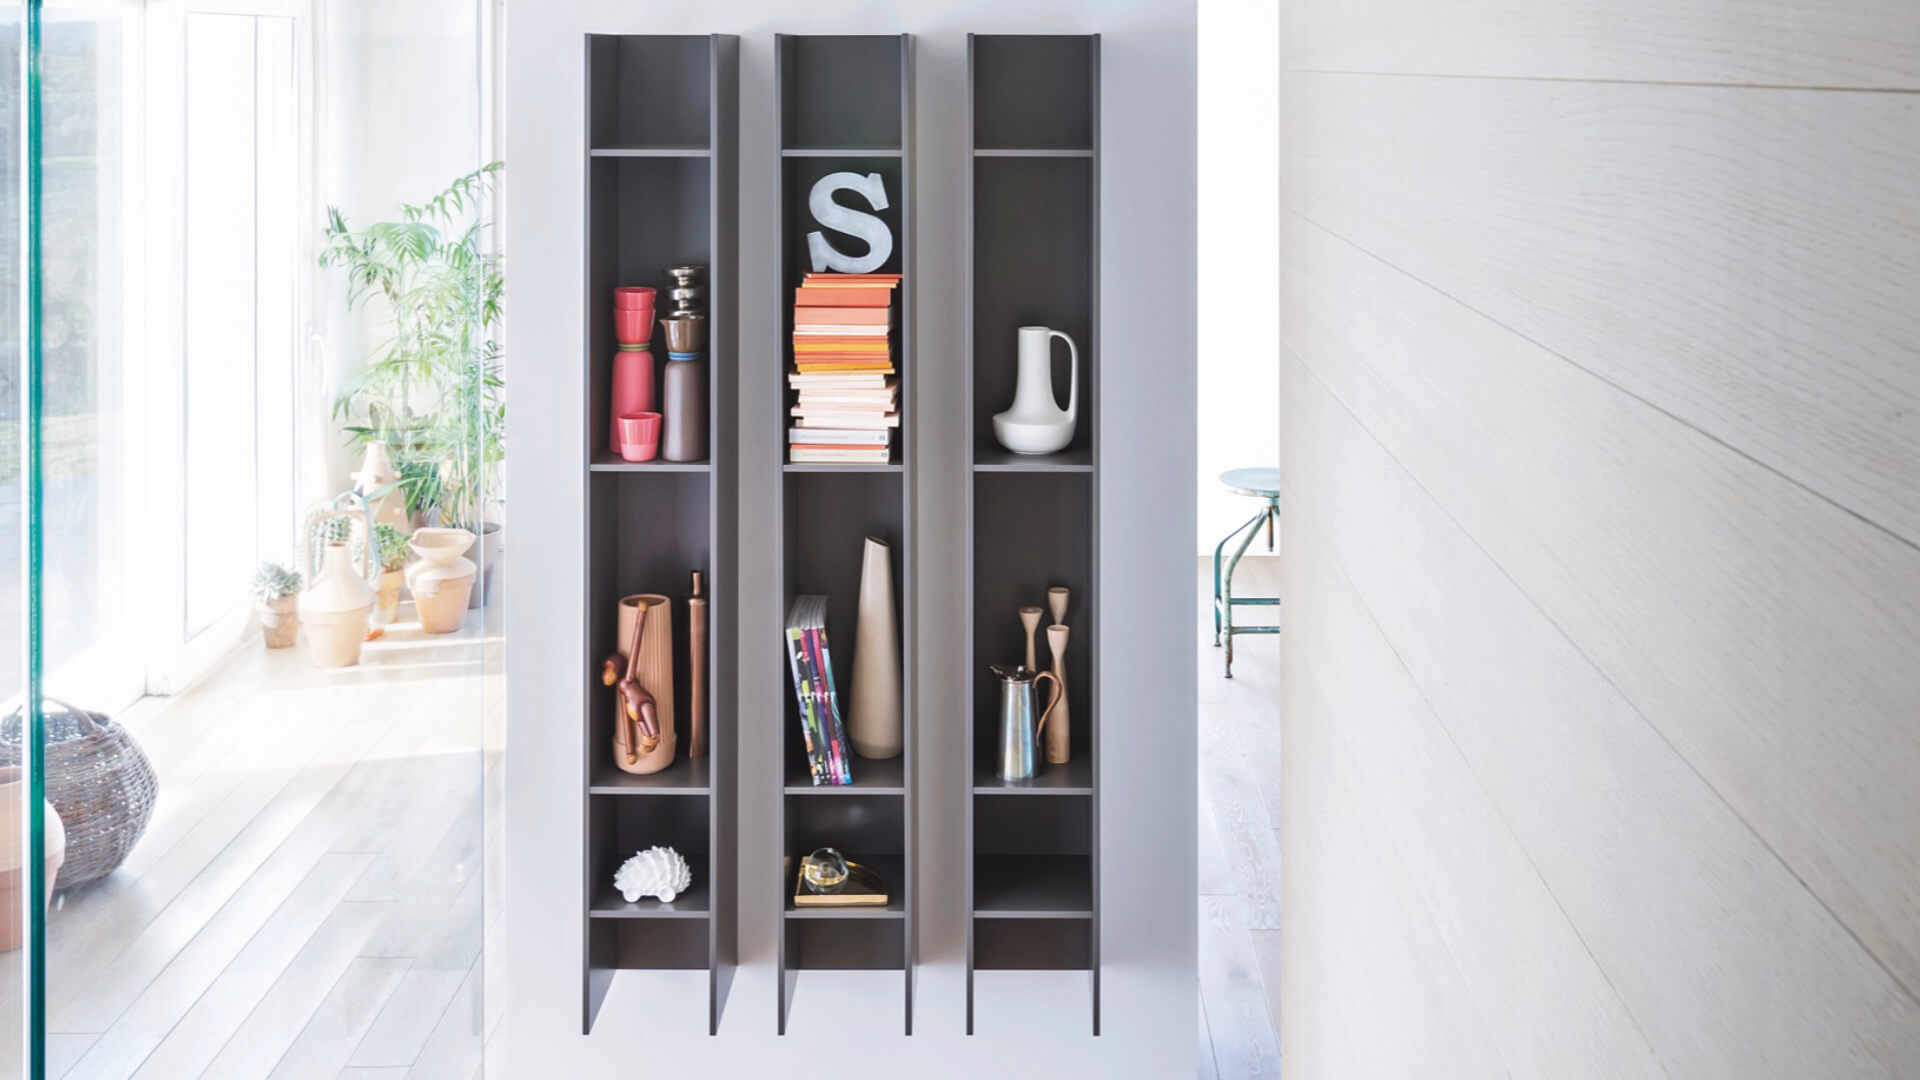 Blog IDW - How to use vertical space at home